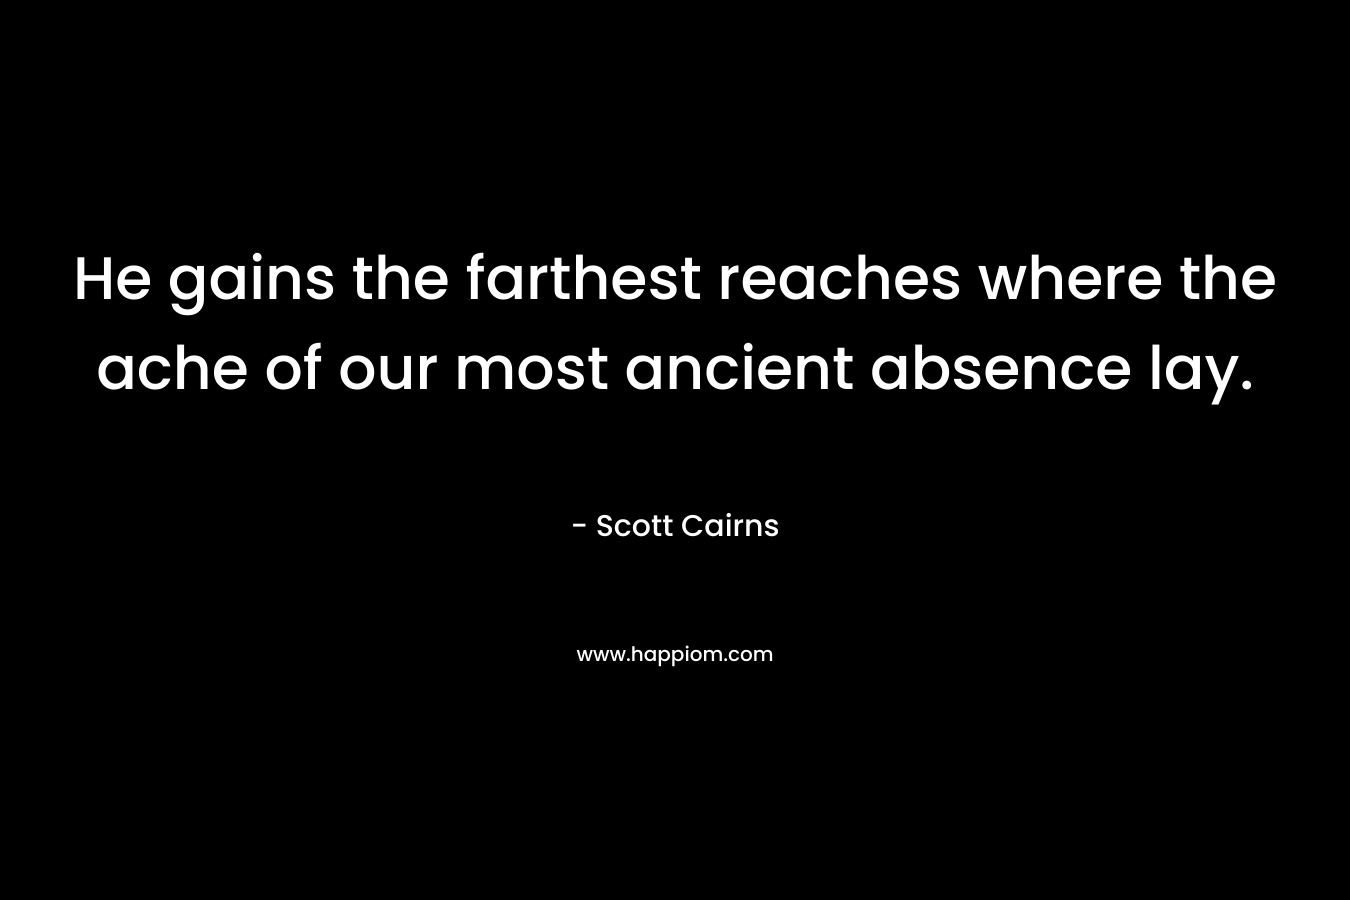 He gains the farthest reaches where the ache of our most ancient absence lay.